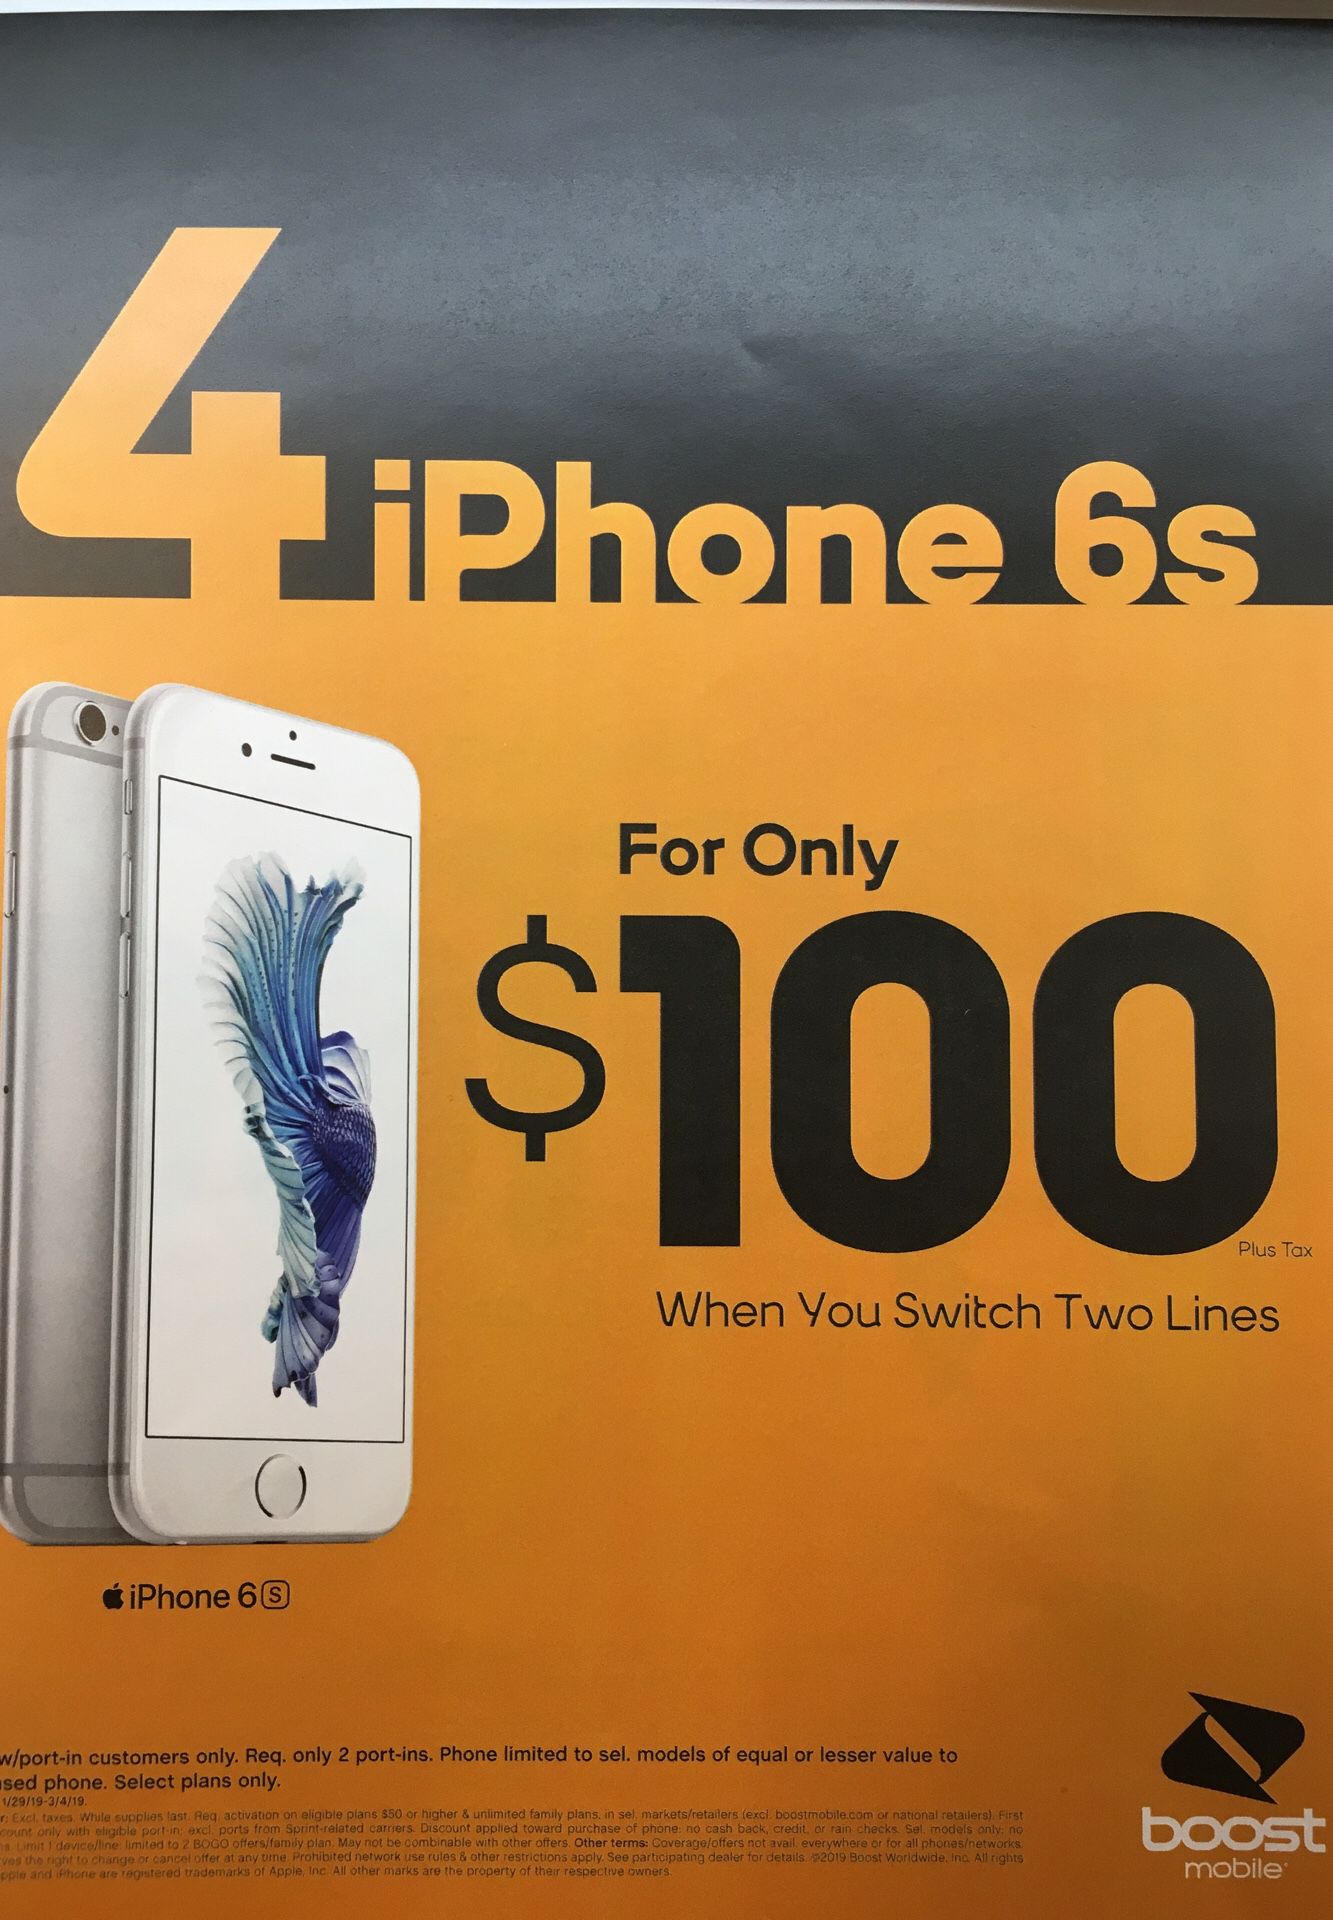 4 lines for 100 & 4 free phones